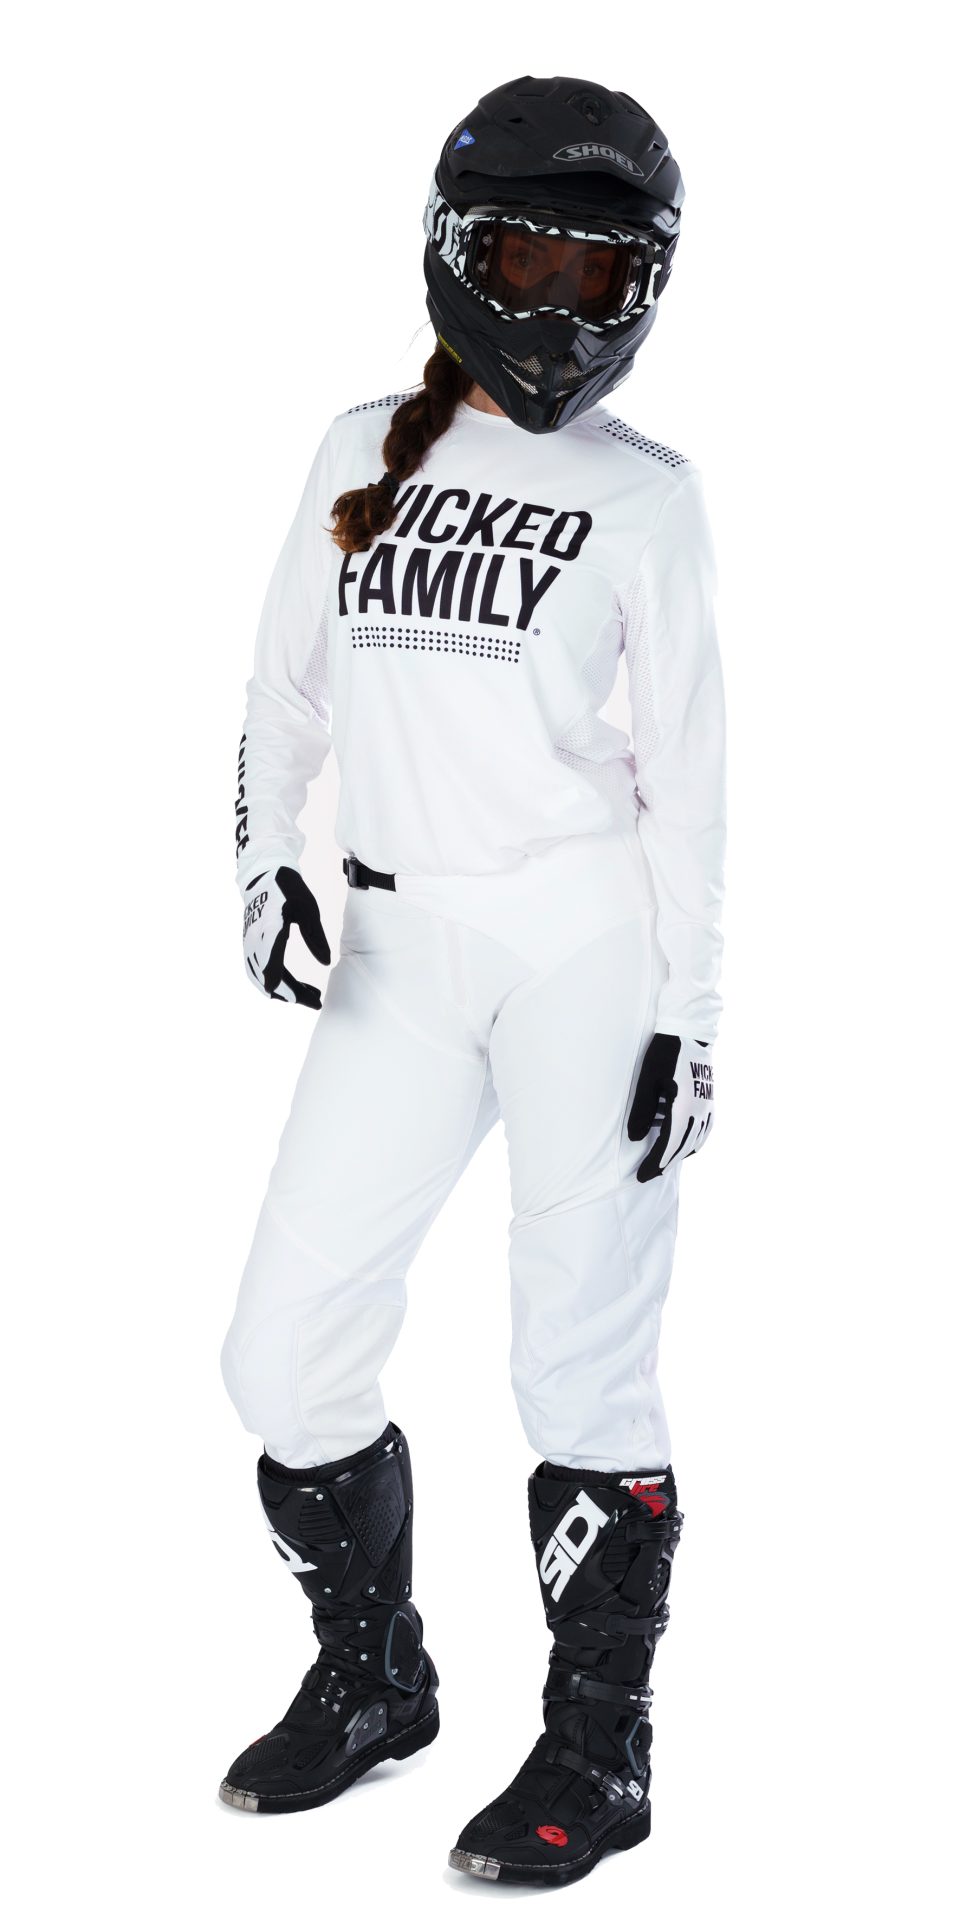 Solid mx gear white woman